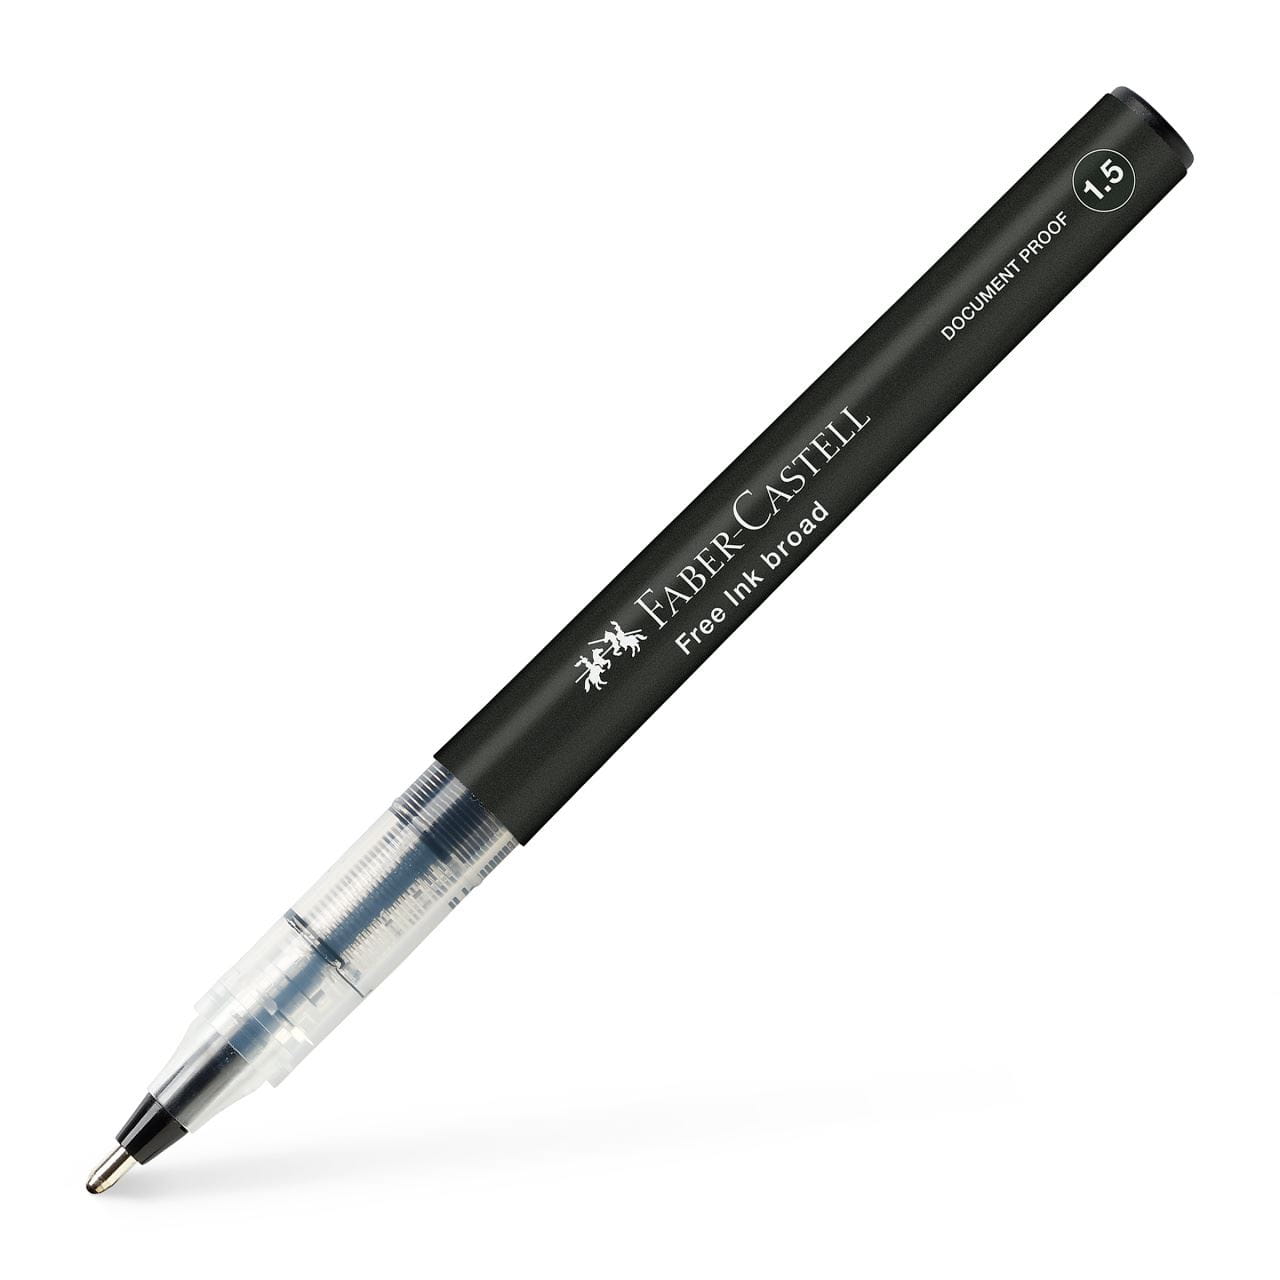 Faber-Castell - Free Ink rollerball, 1.5 mm, black